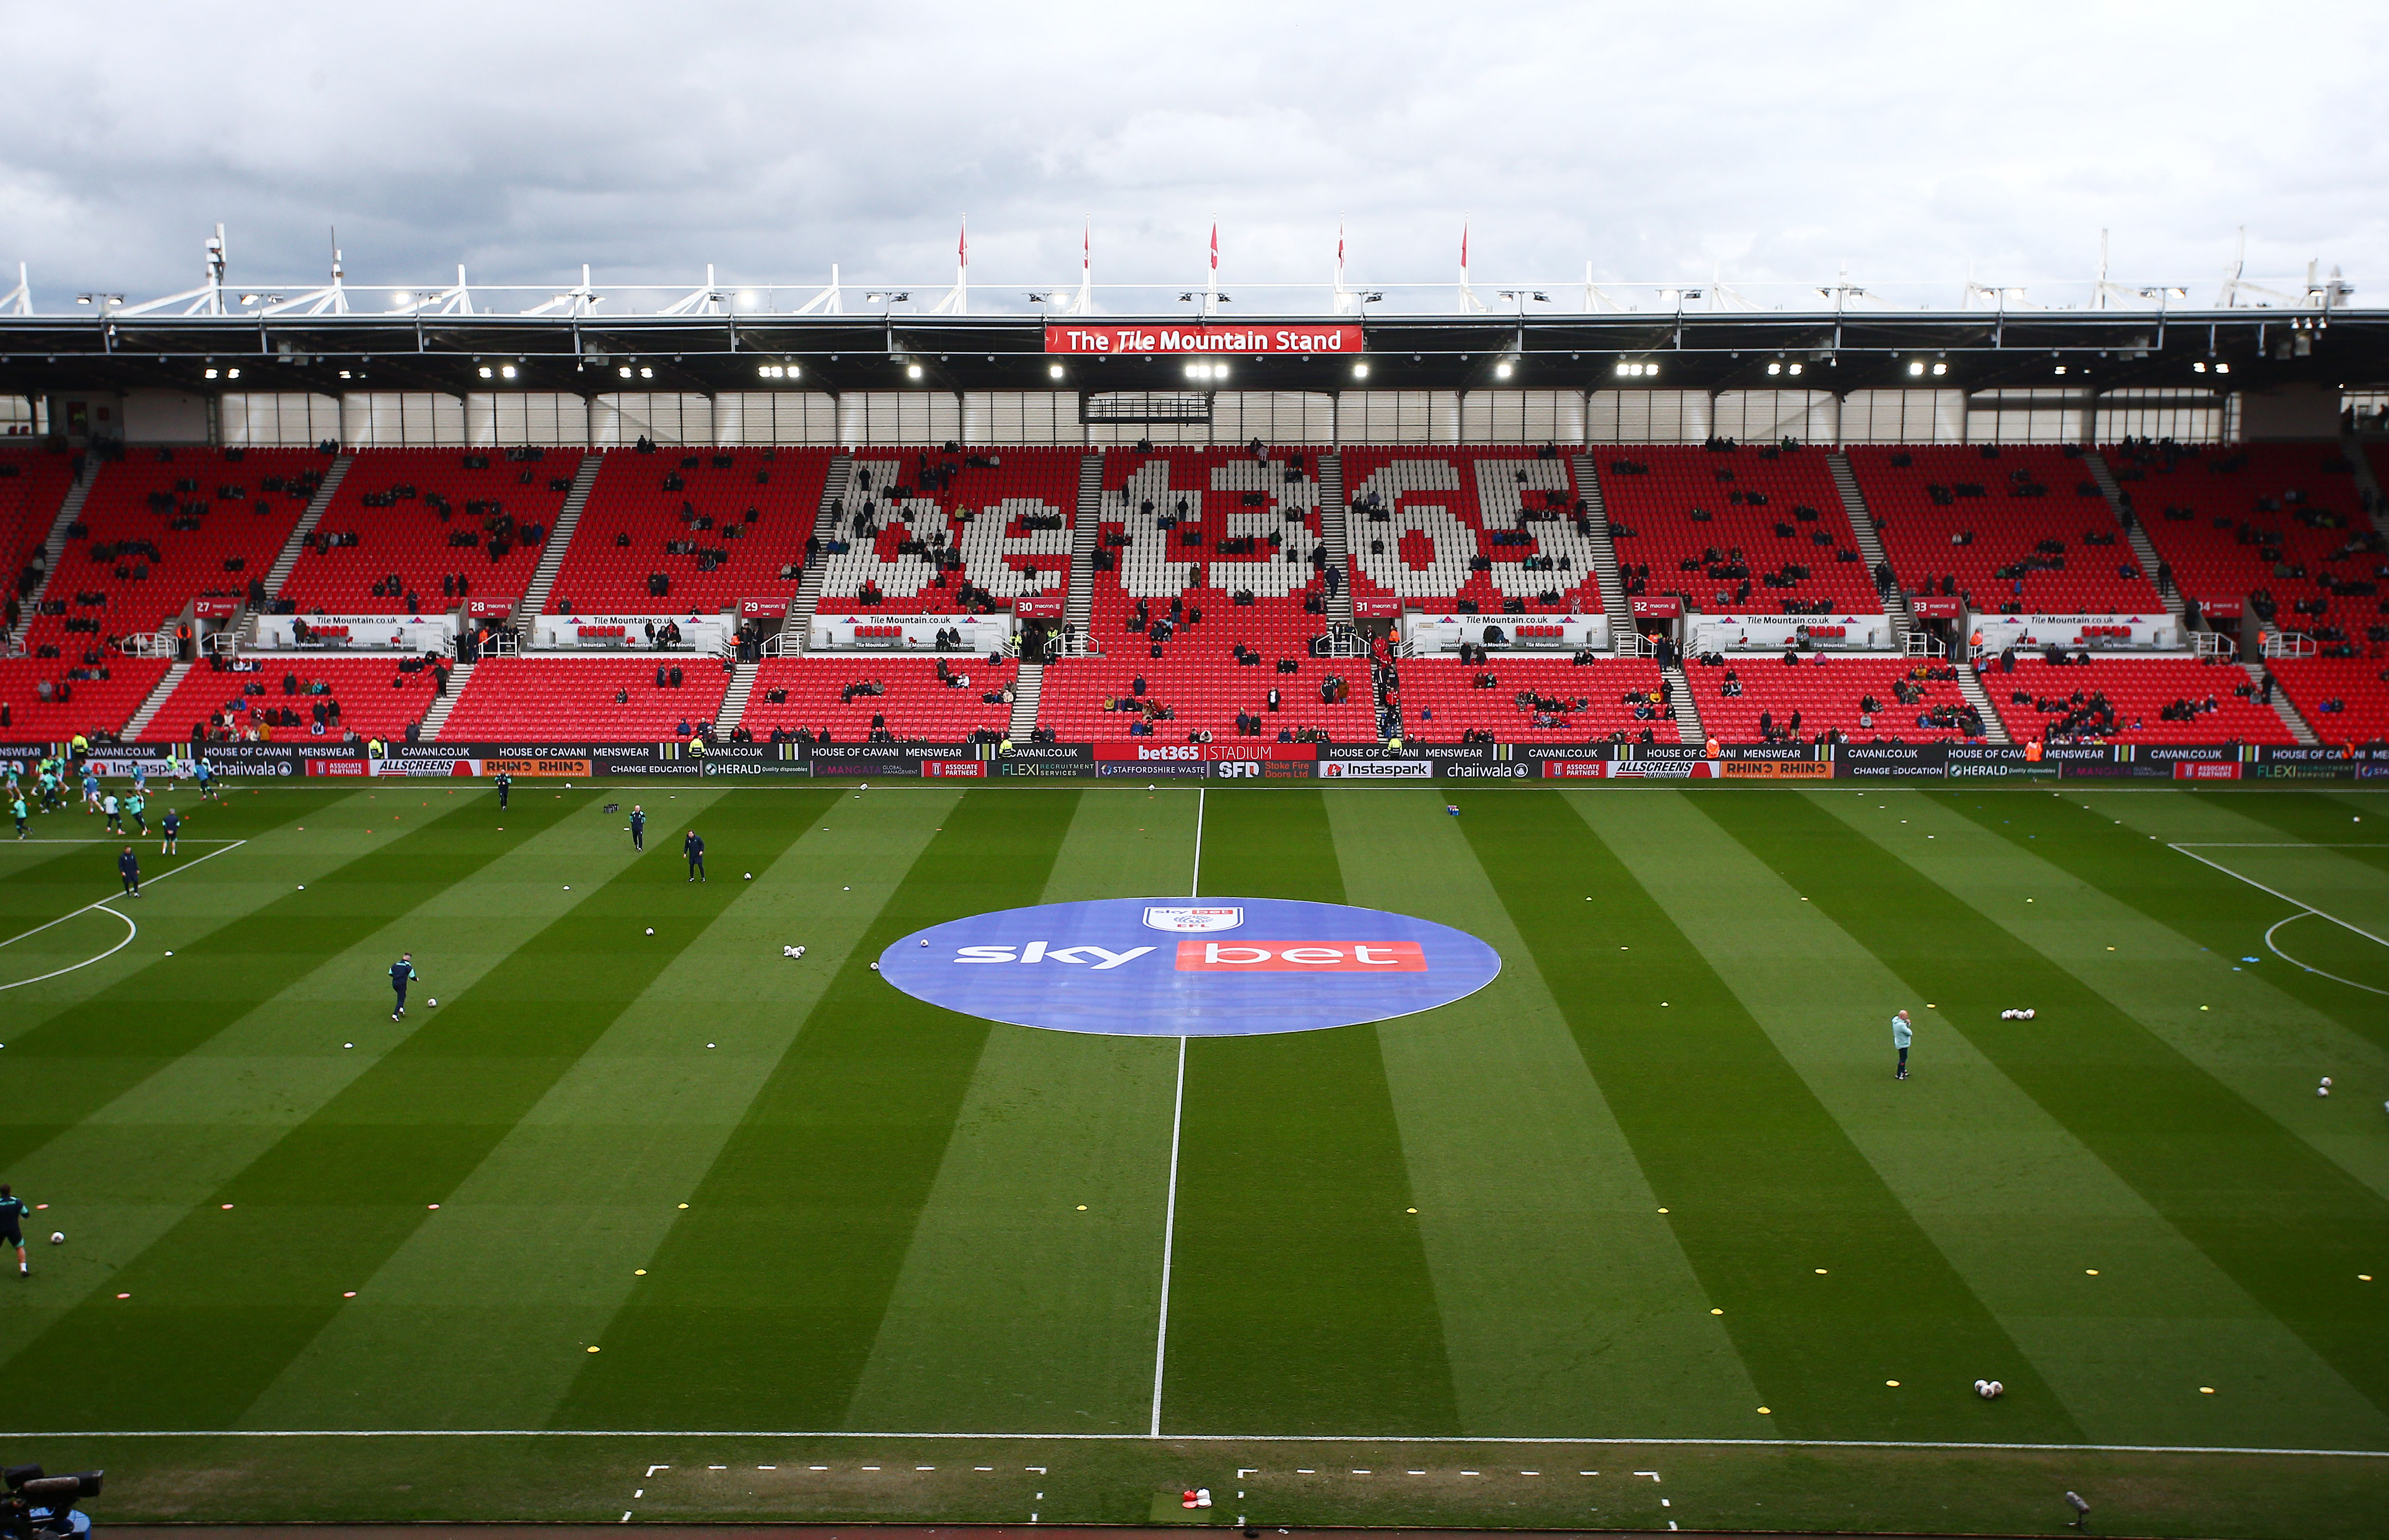 A general view of the bet365 Stadium with bet365 branding on the seats